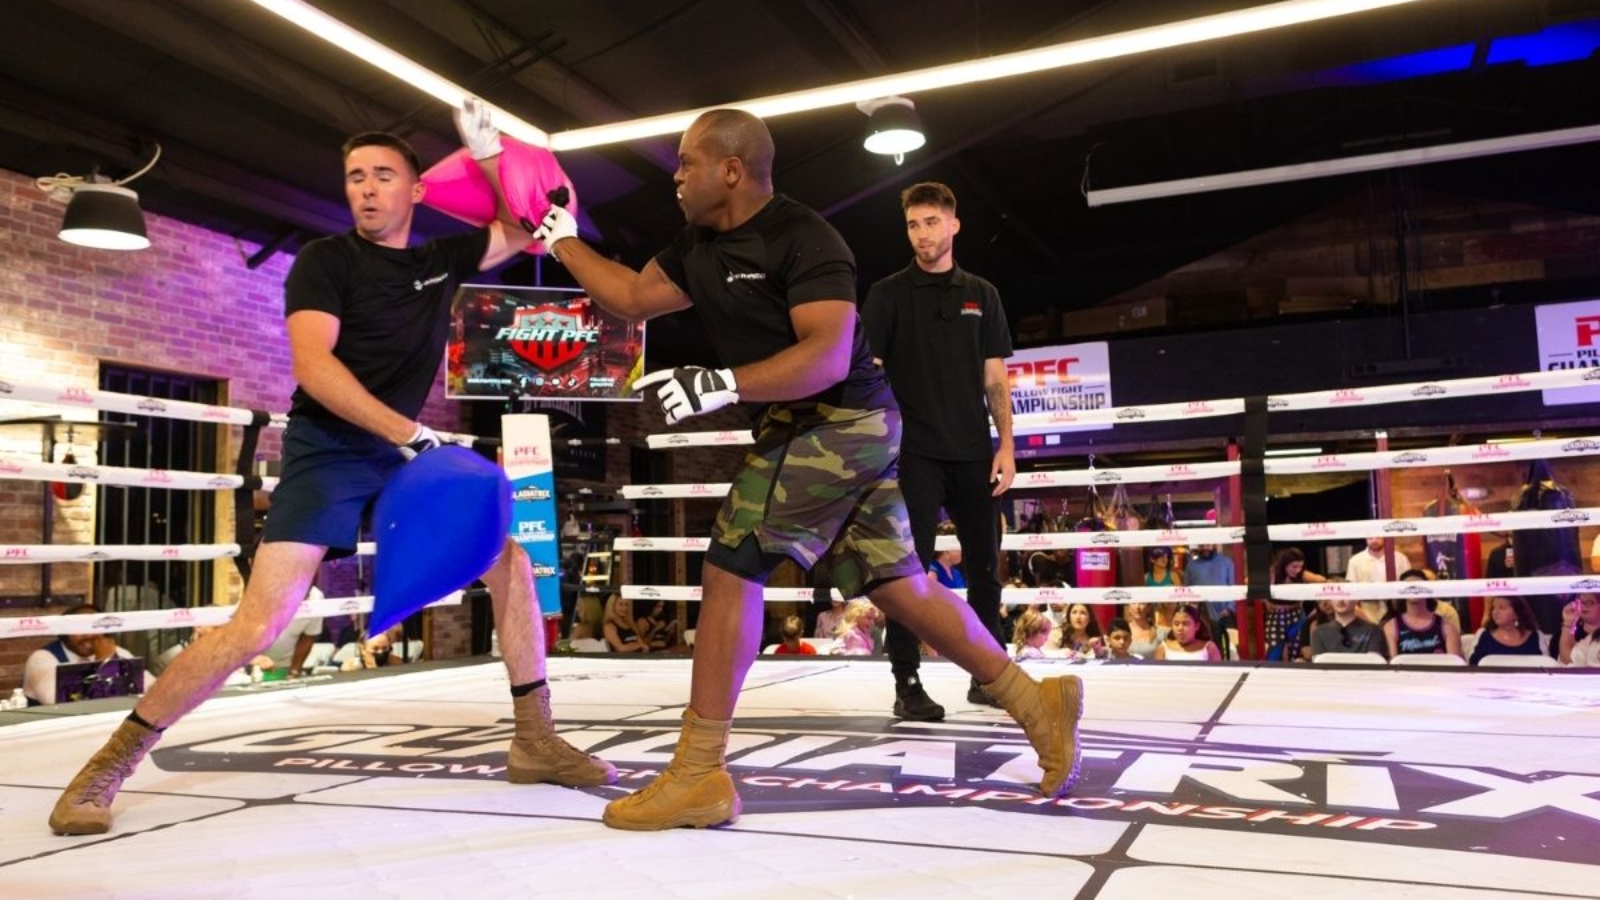 Highlights from PFC 2 which took place September 25th at the Delray Boxing Gym.